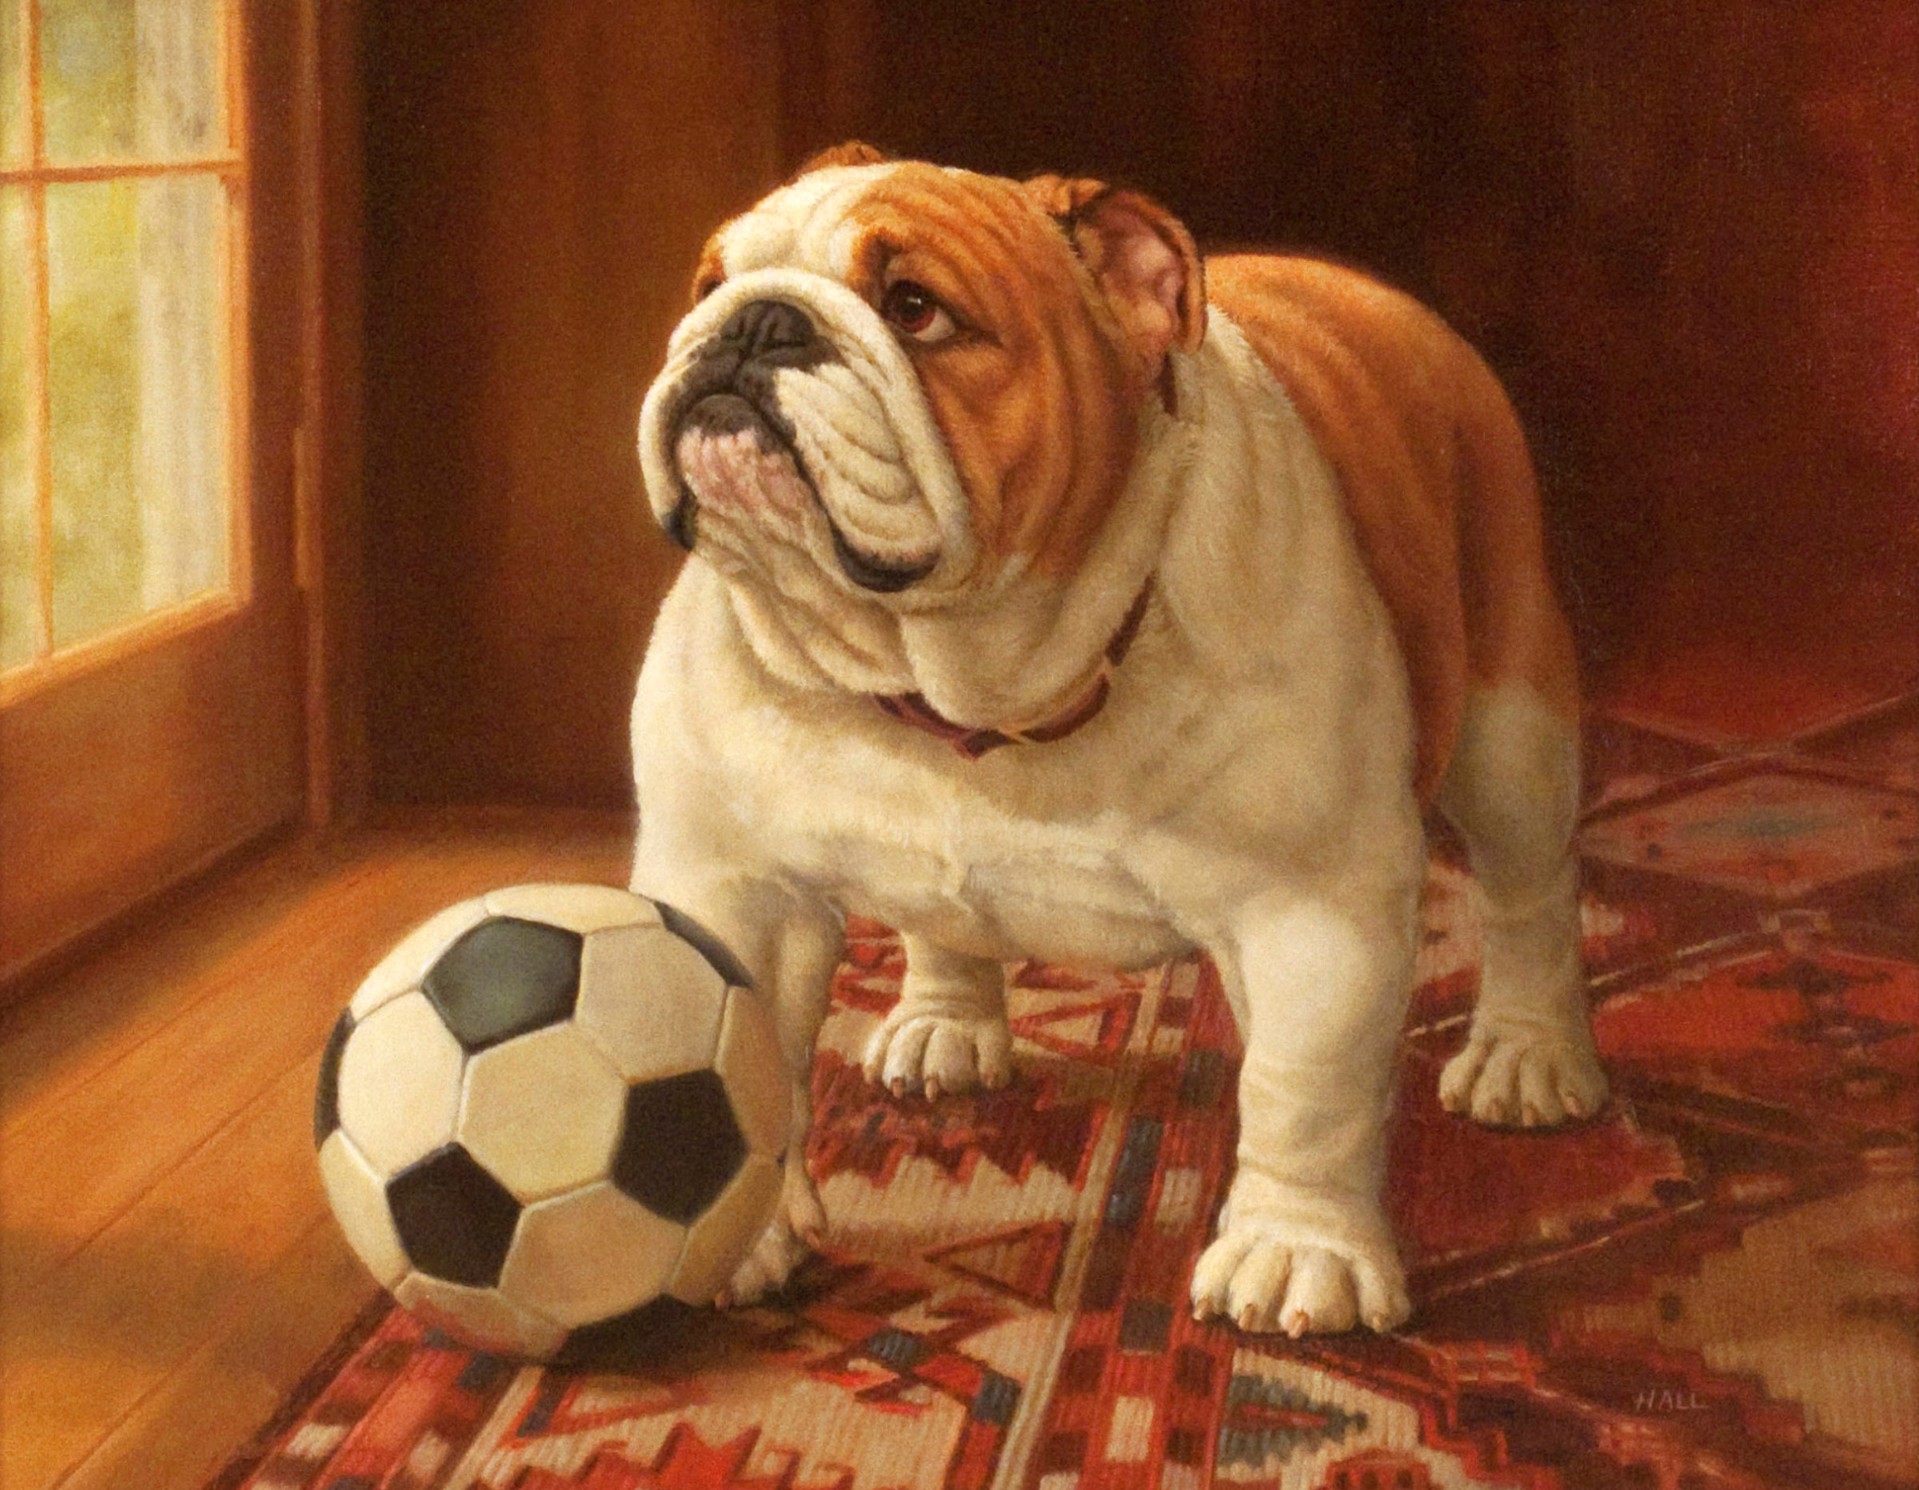 Ready to Play! by Pamela Dennis Hall